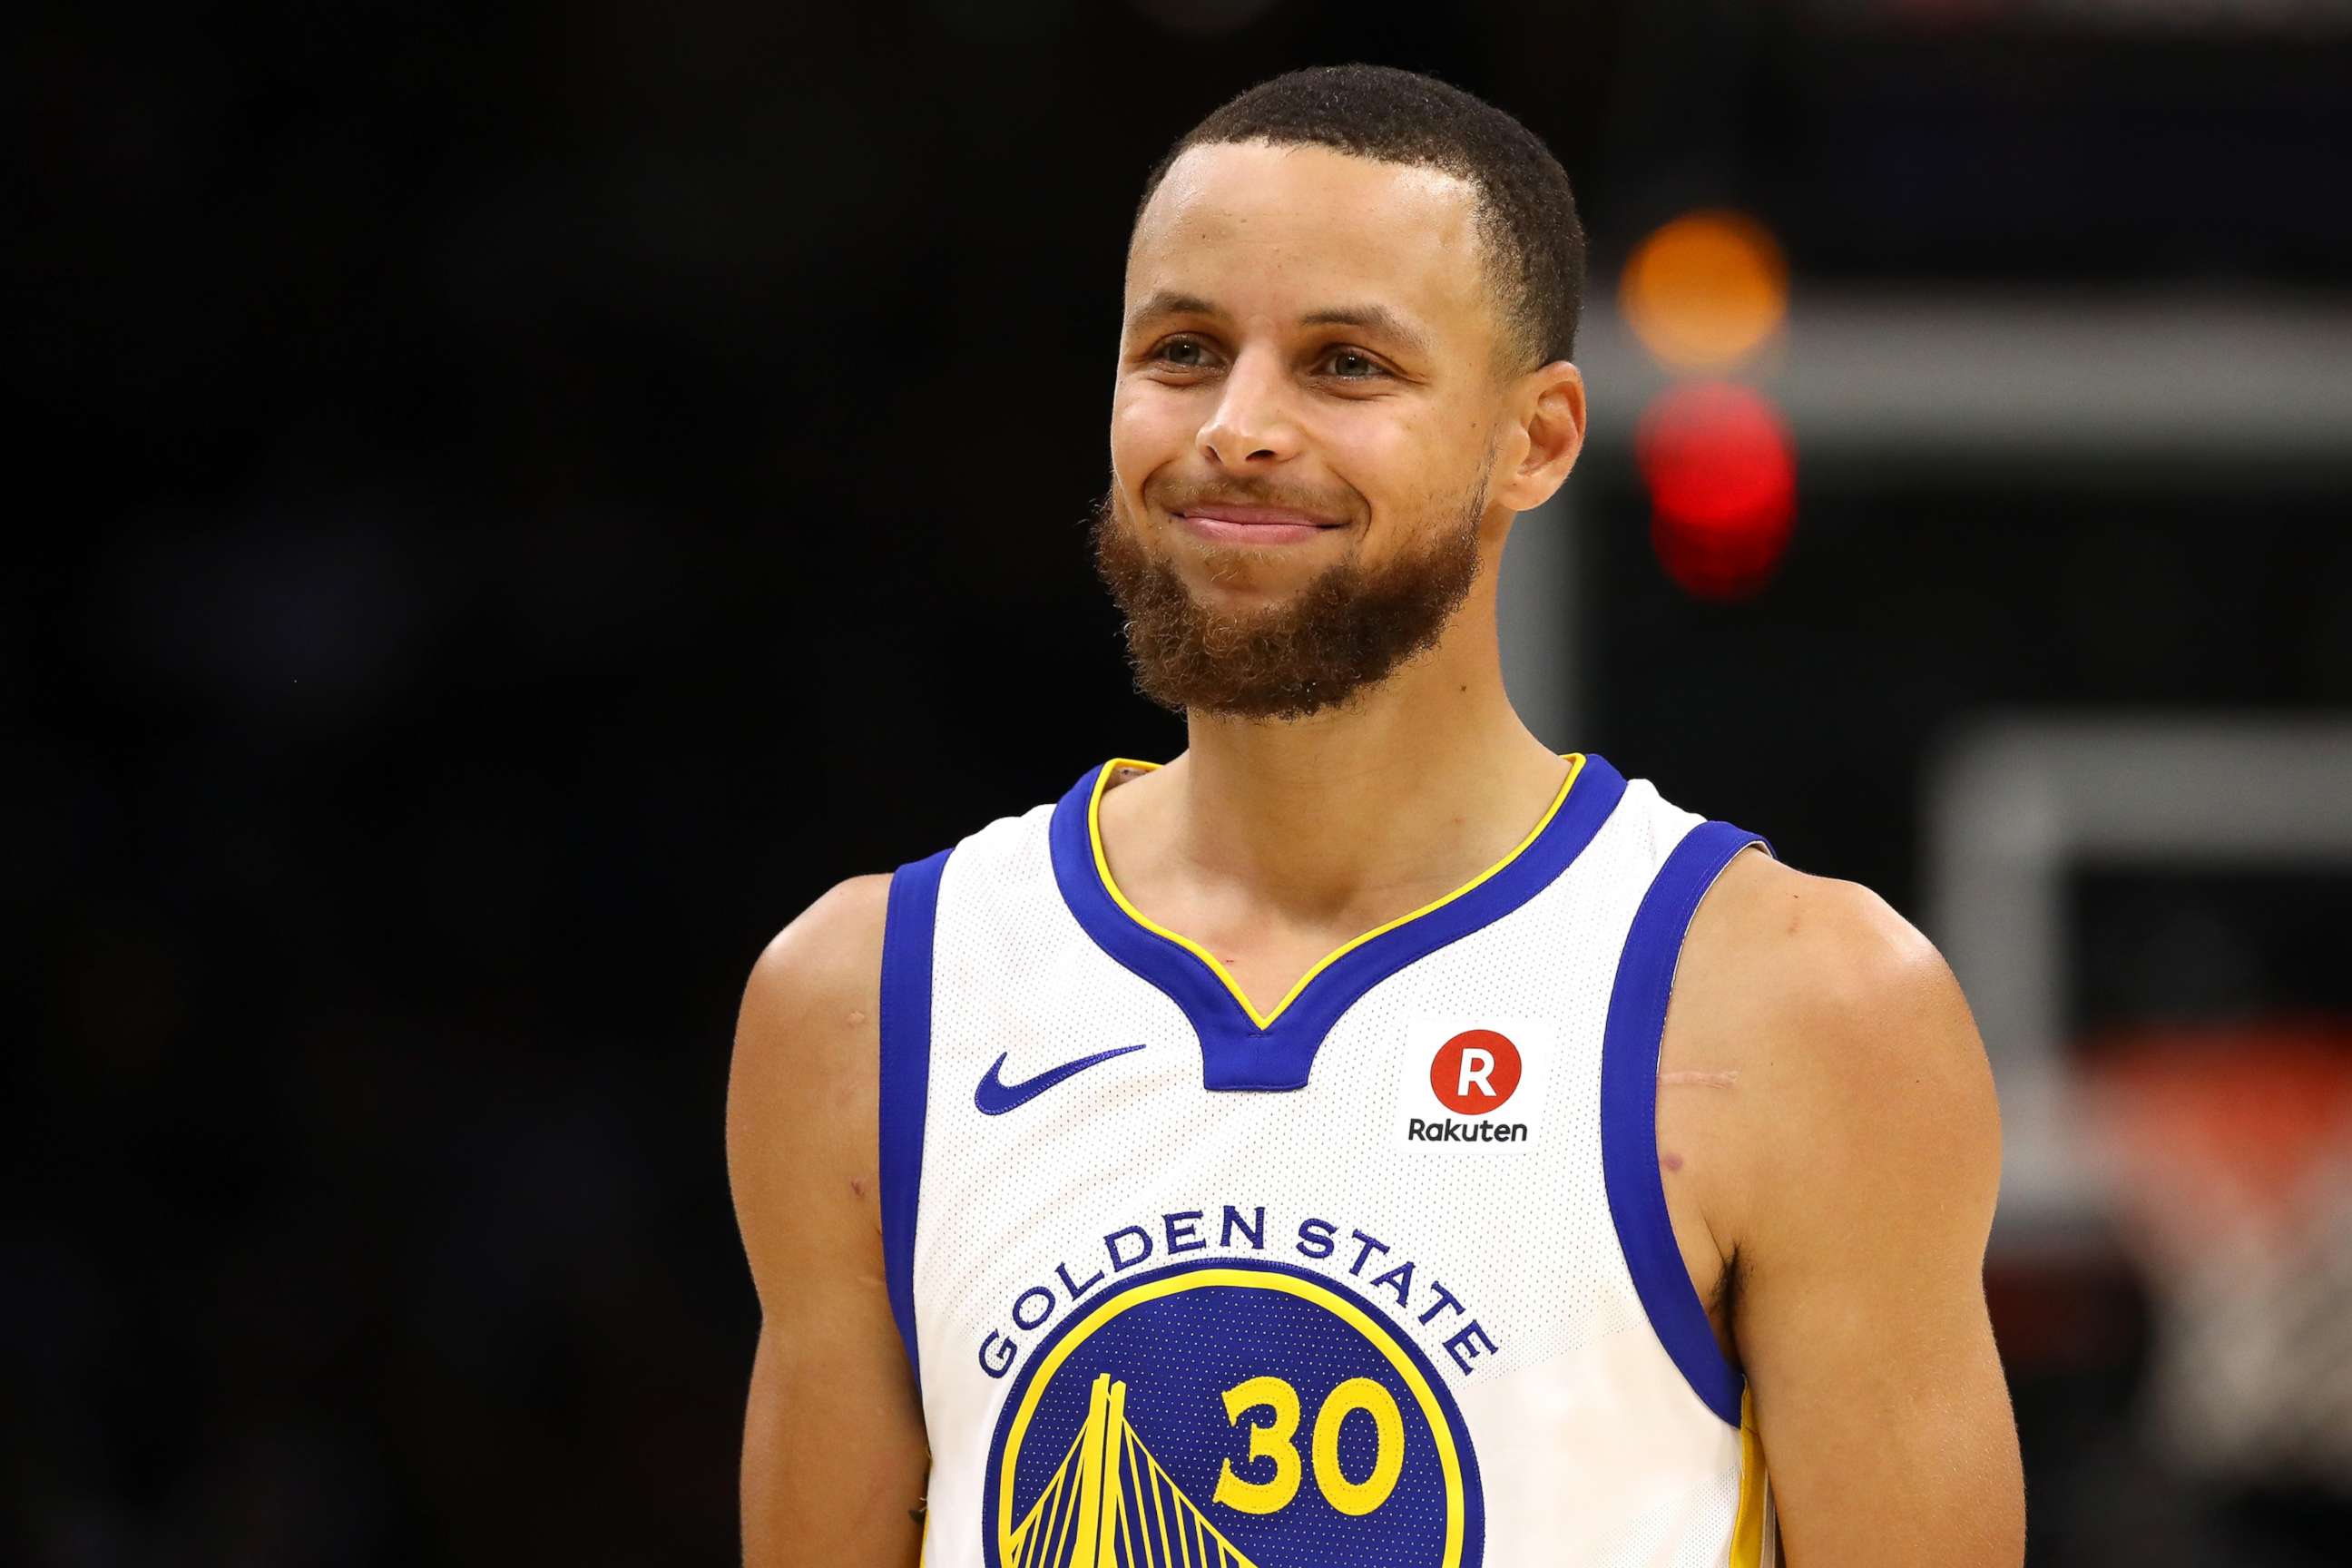 nba Stephen Curry  Nba stephen curry, Curry nba, Stephen curry